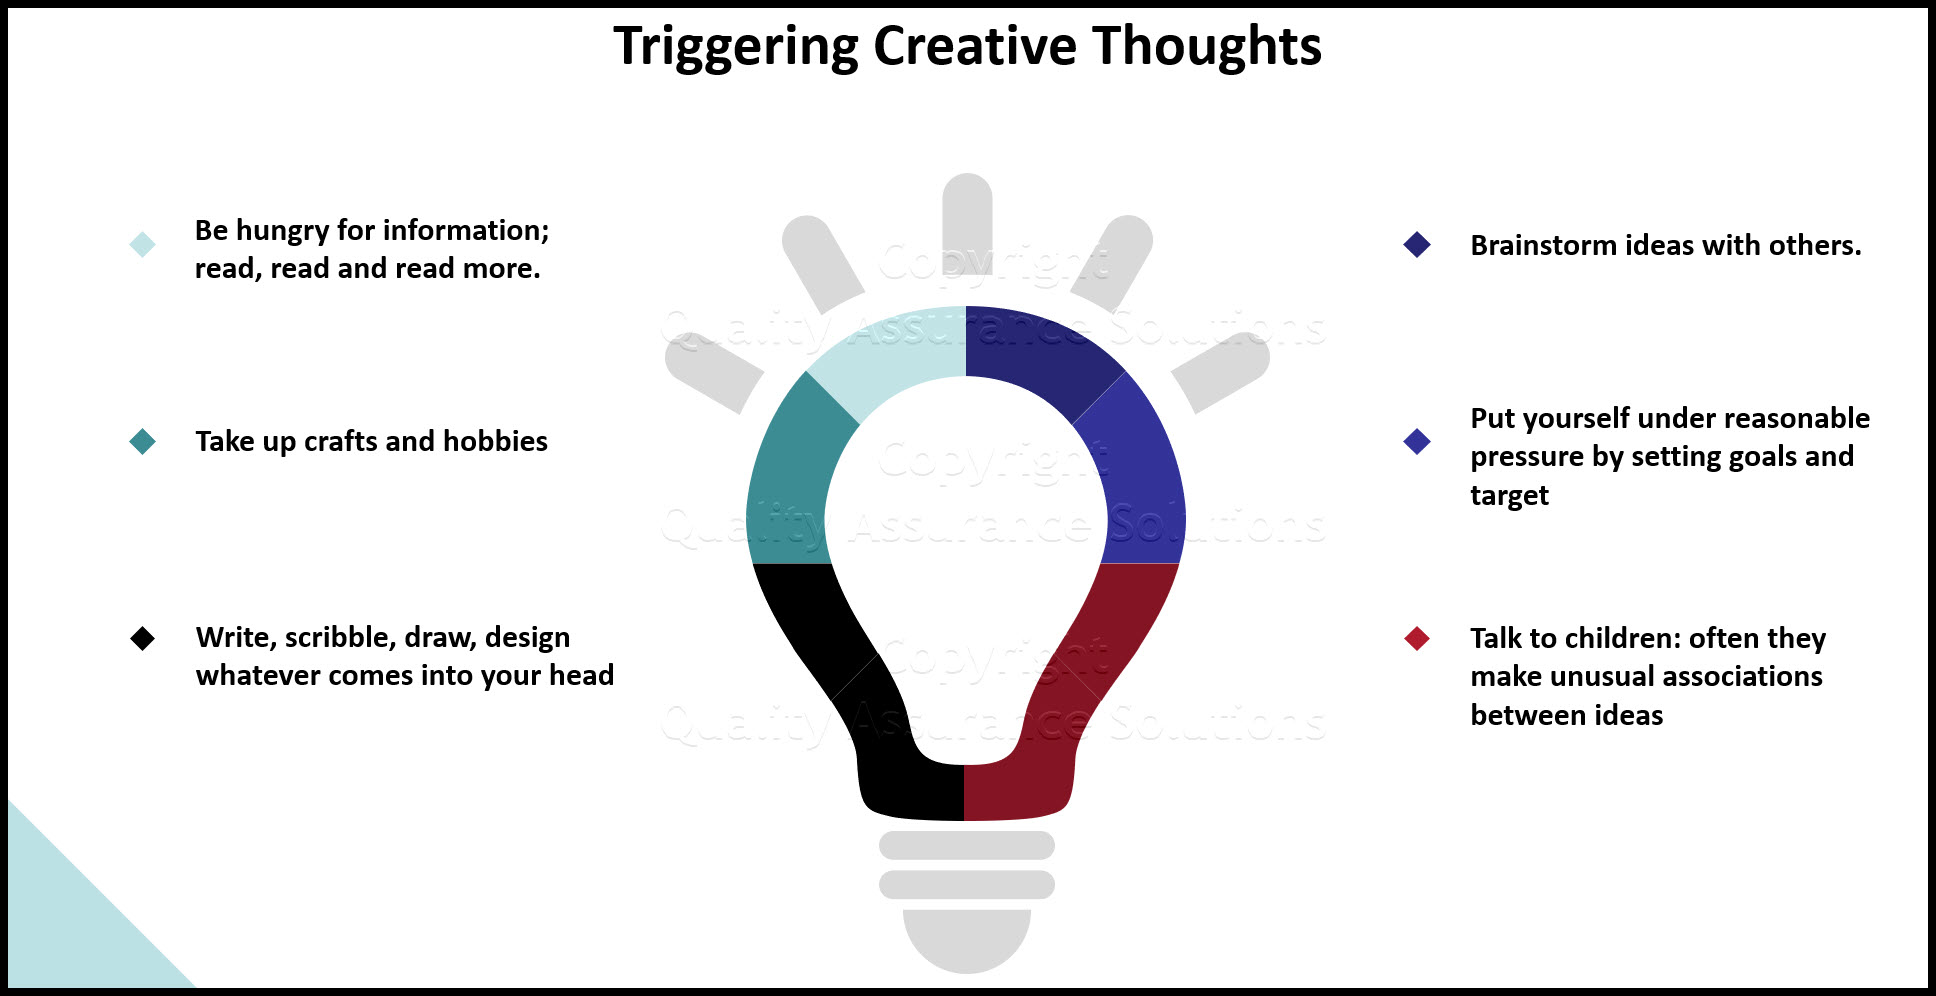 Is Creative Thinking A Bad Thing – The major types of thinking: creative thinking and critical thinking